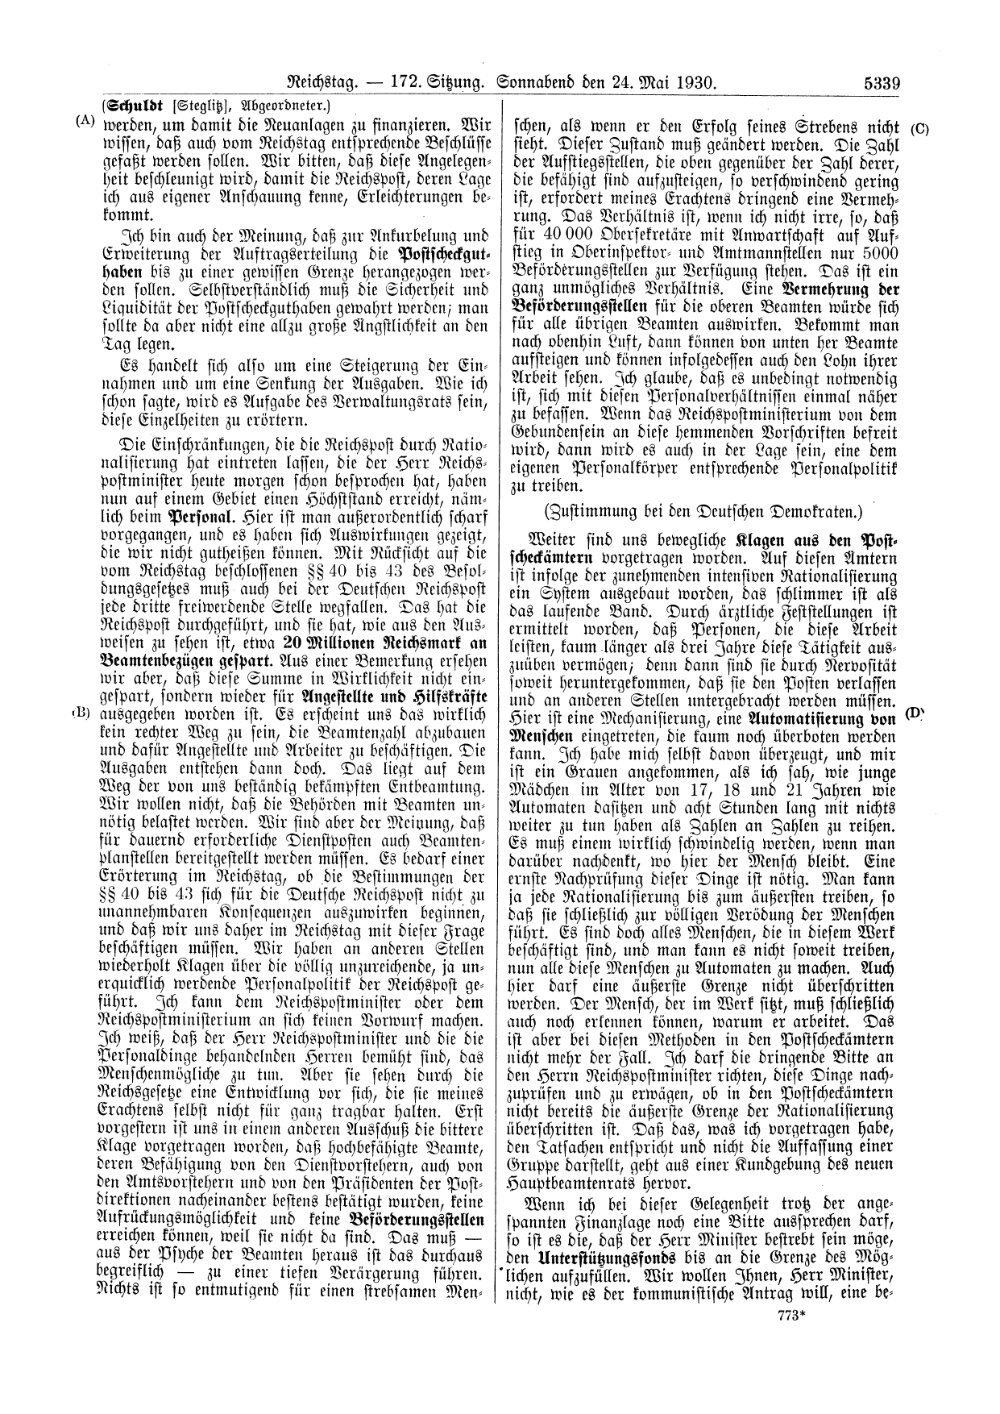 Scan of page 5339